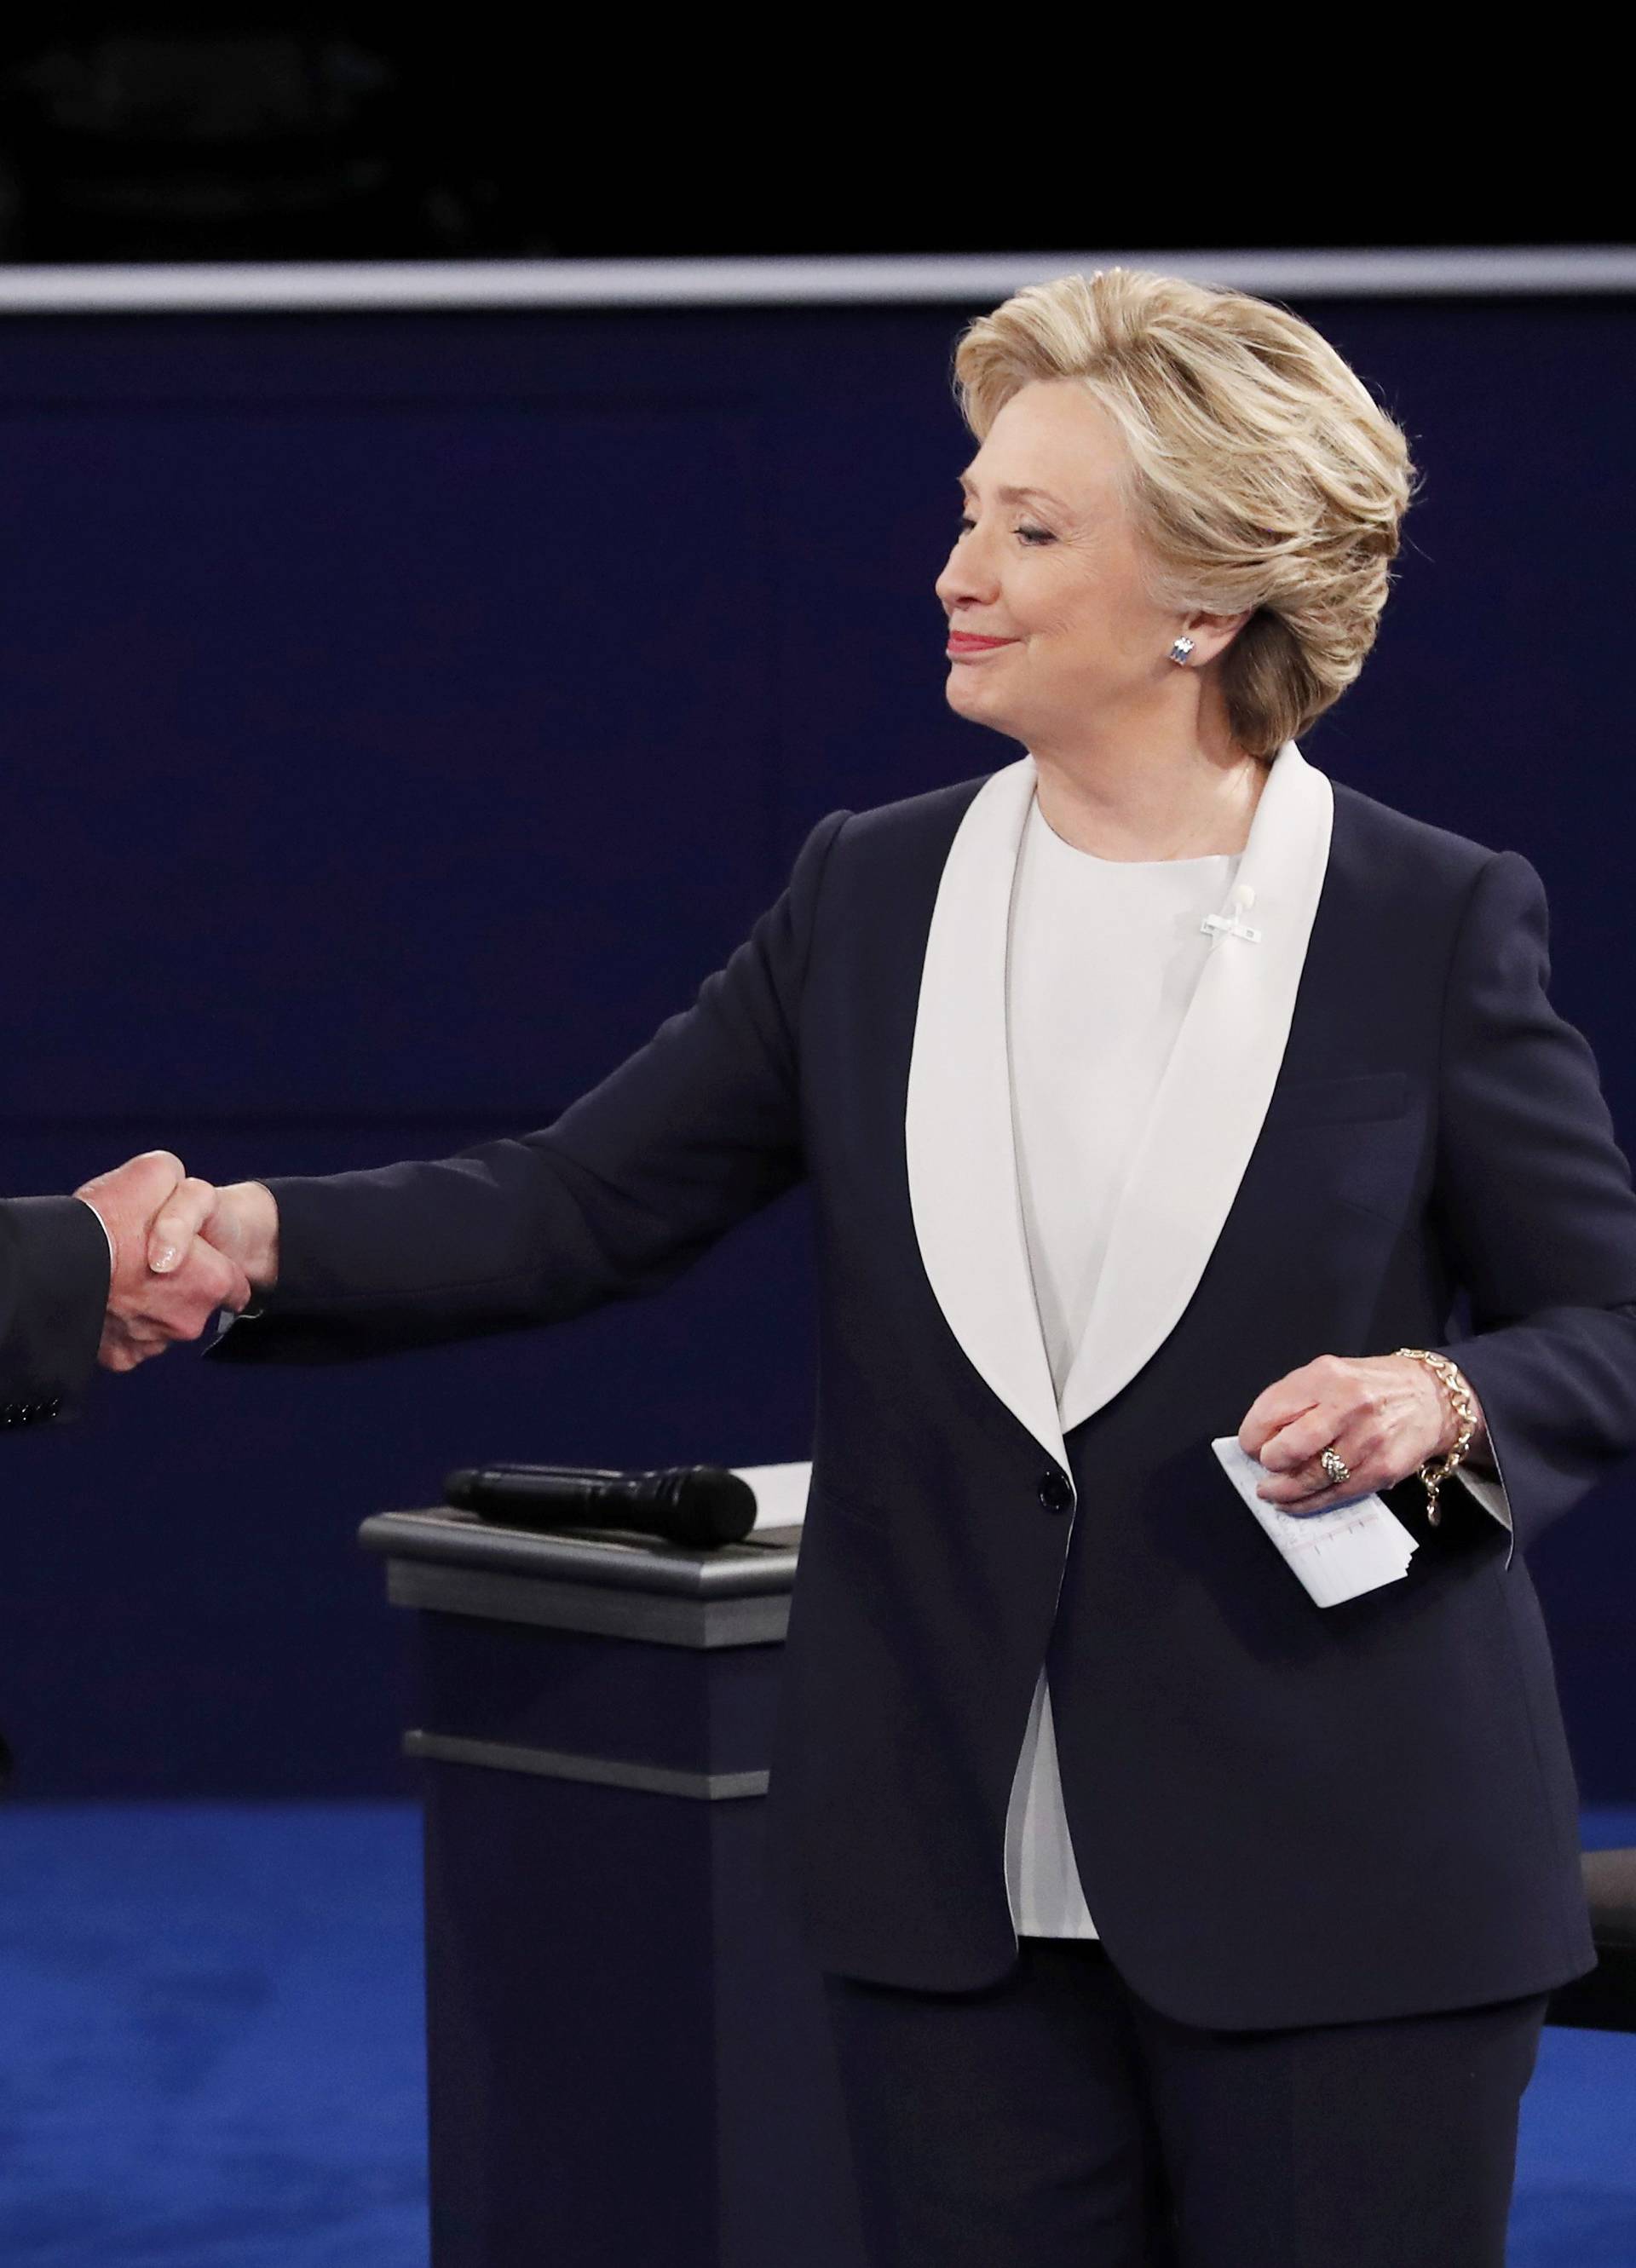 Republican U.S. presidential nominee Donald Trump and Democratic U.S. presidential nominee Hillary Clinton shake hands at the end of their presidential town hall debate at Washington University in St. Louis